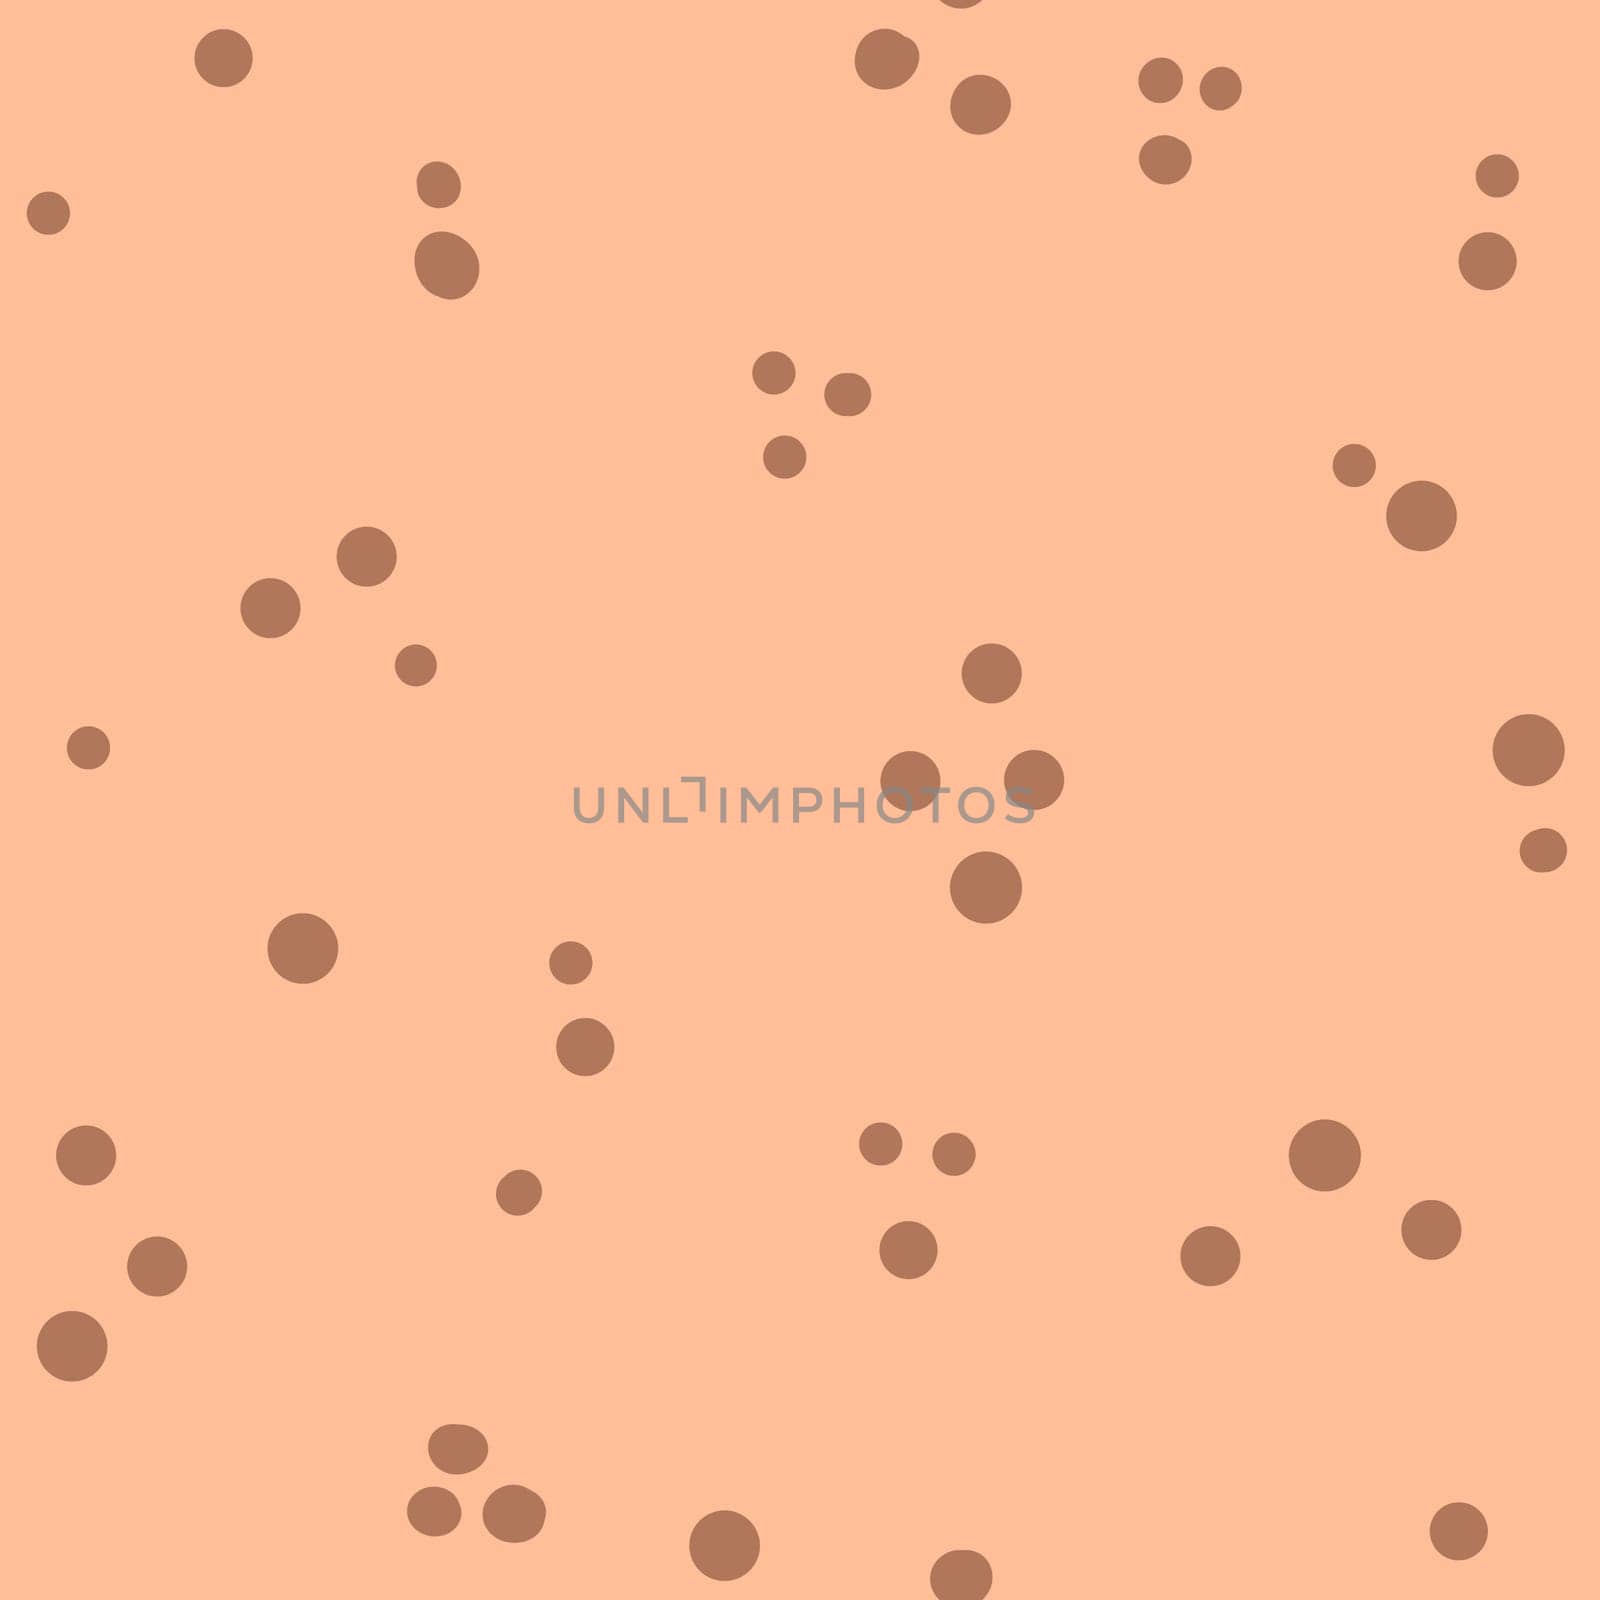 Seamless hand drawn pattern on peach fuzz isolated background pastel neutral beige apricot blush polka dot. Organic soft colors abstract light white round circles trendy modern minimalist style, color of the year print. by Lagmar